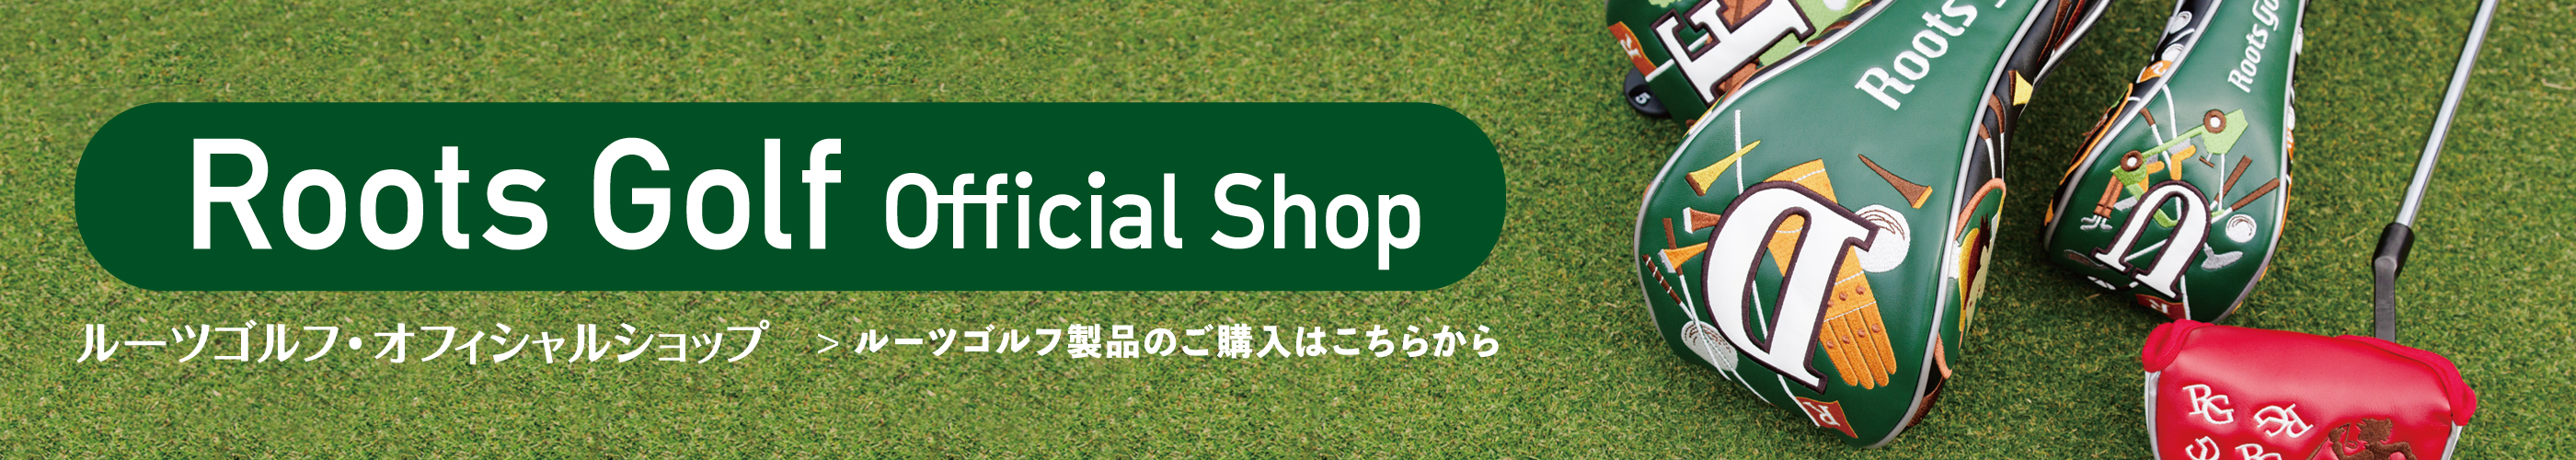 Roots Golf Official Stop